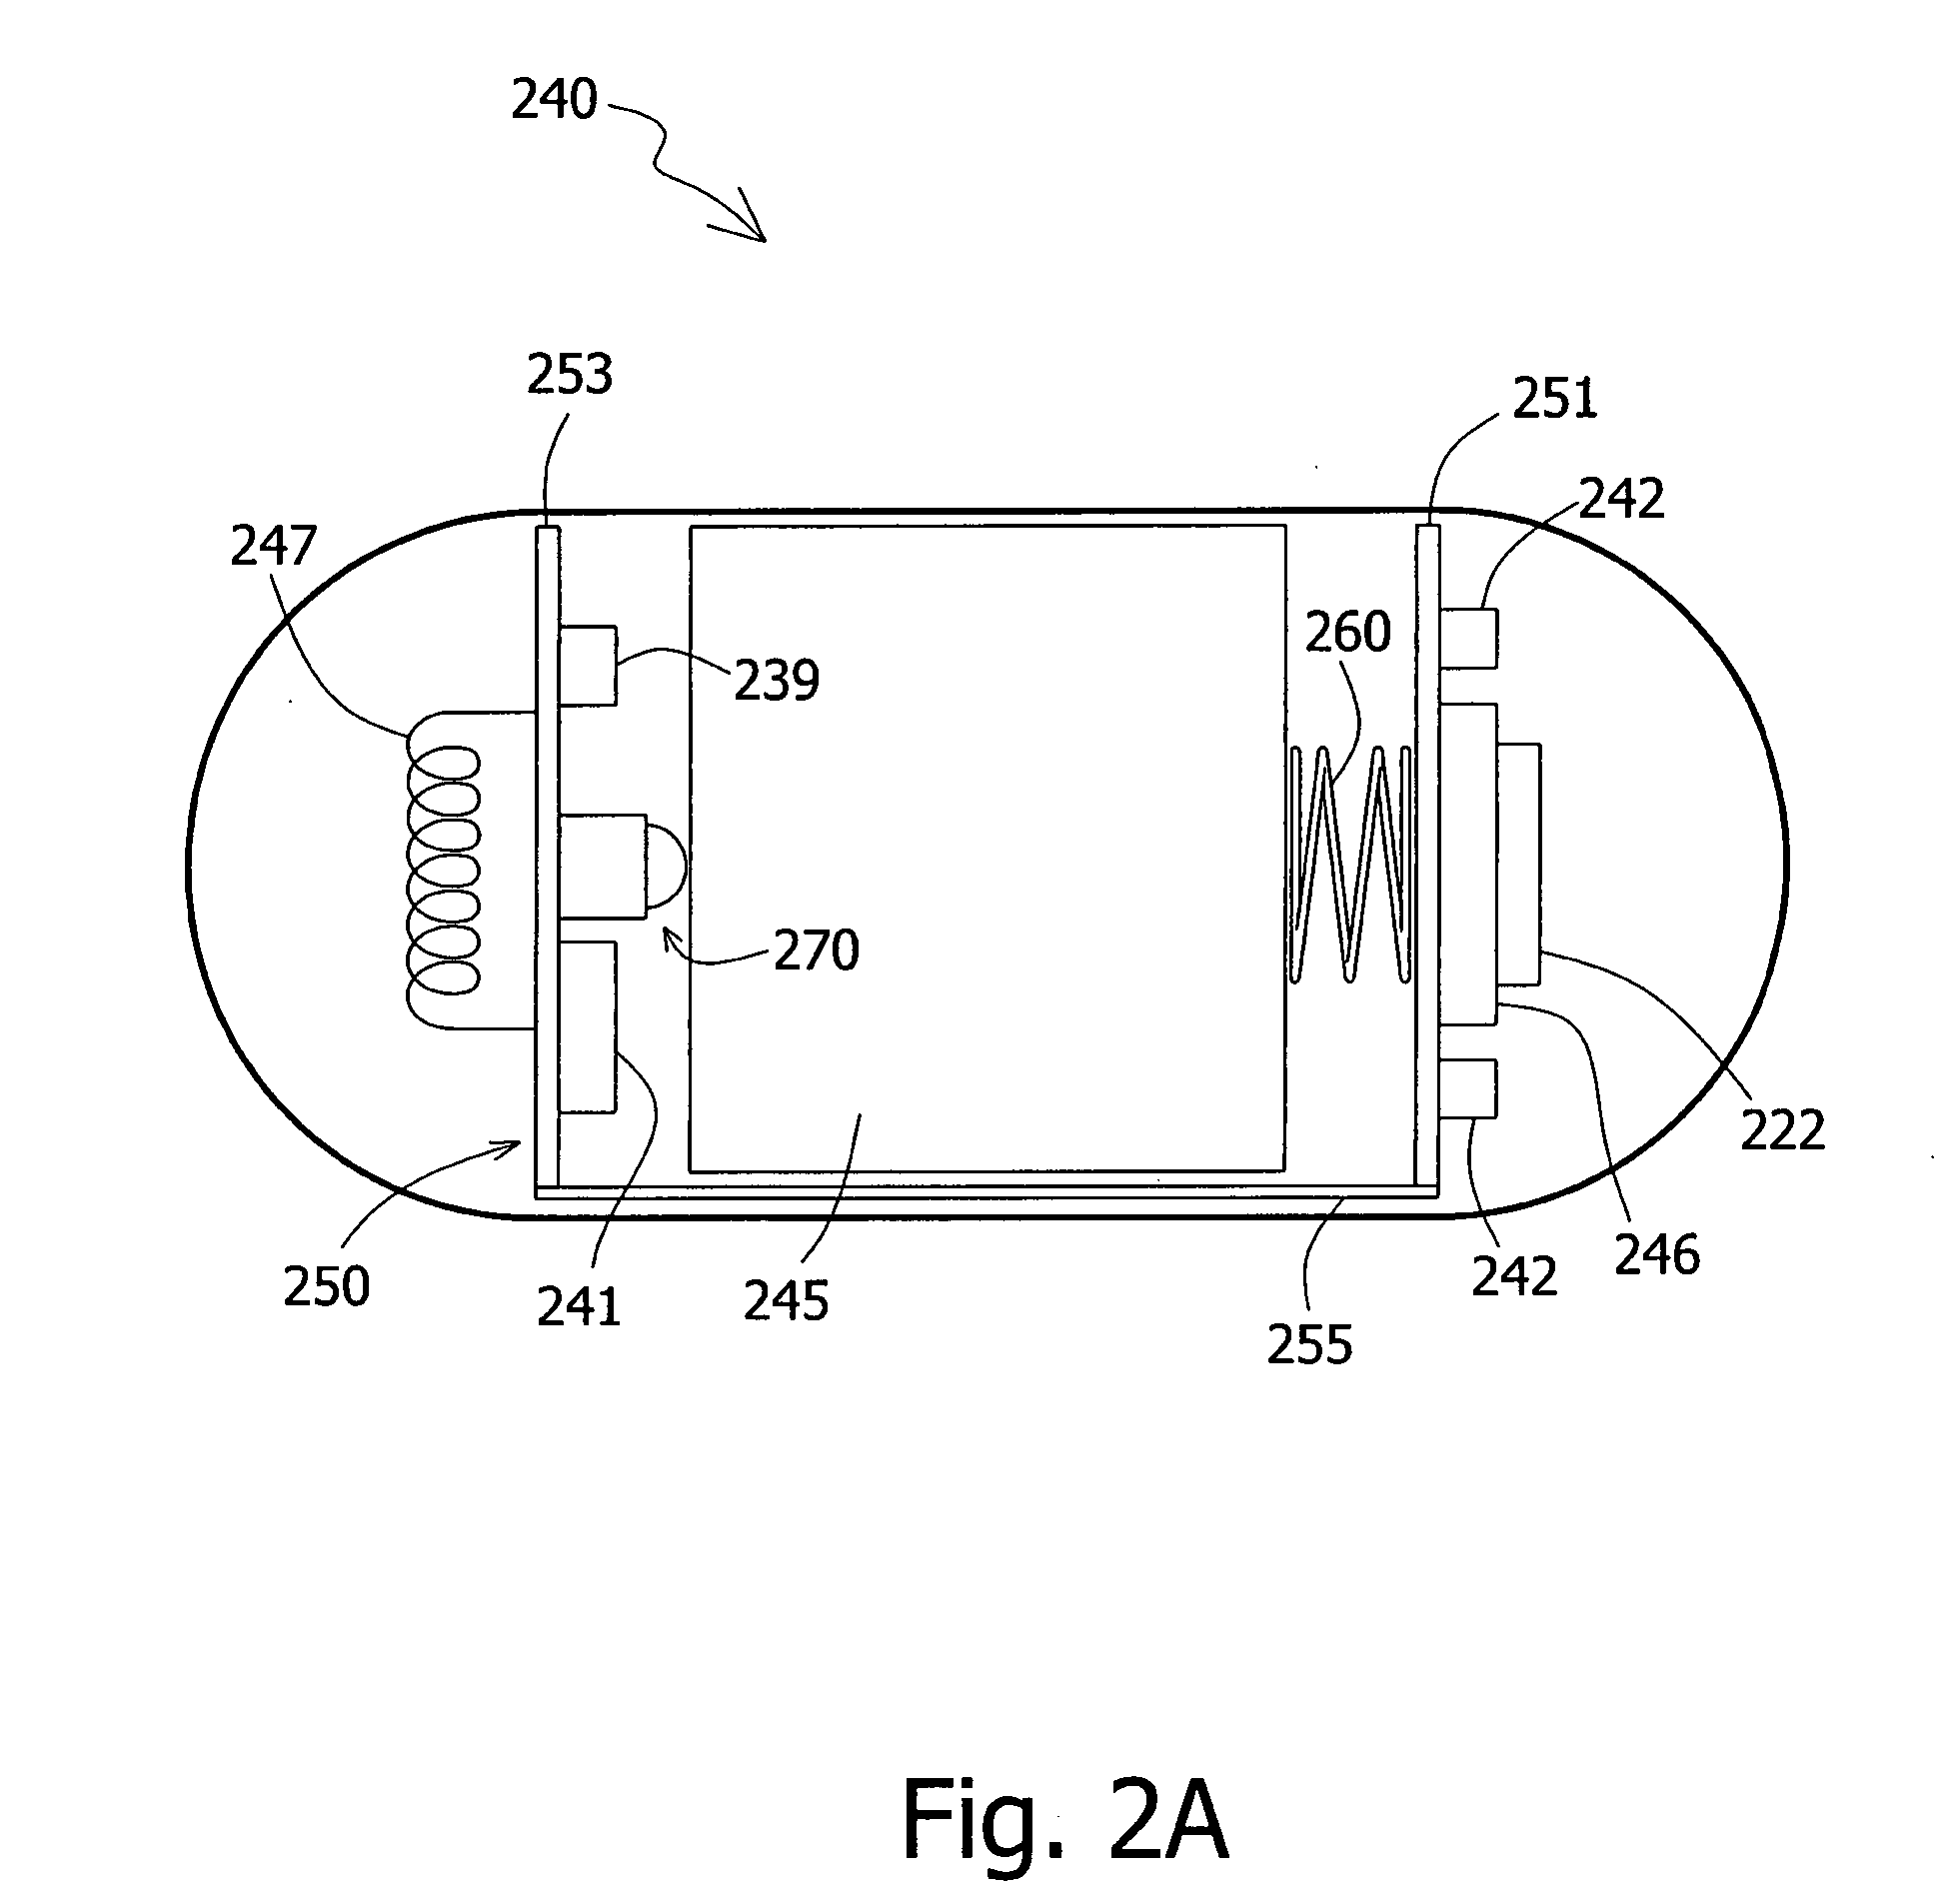 Battery contacts for an in-vivo imaging device